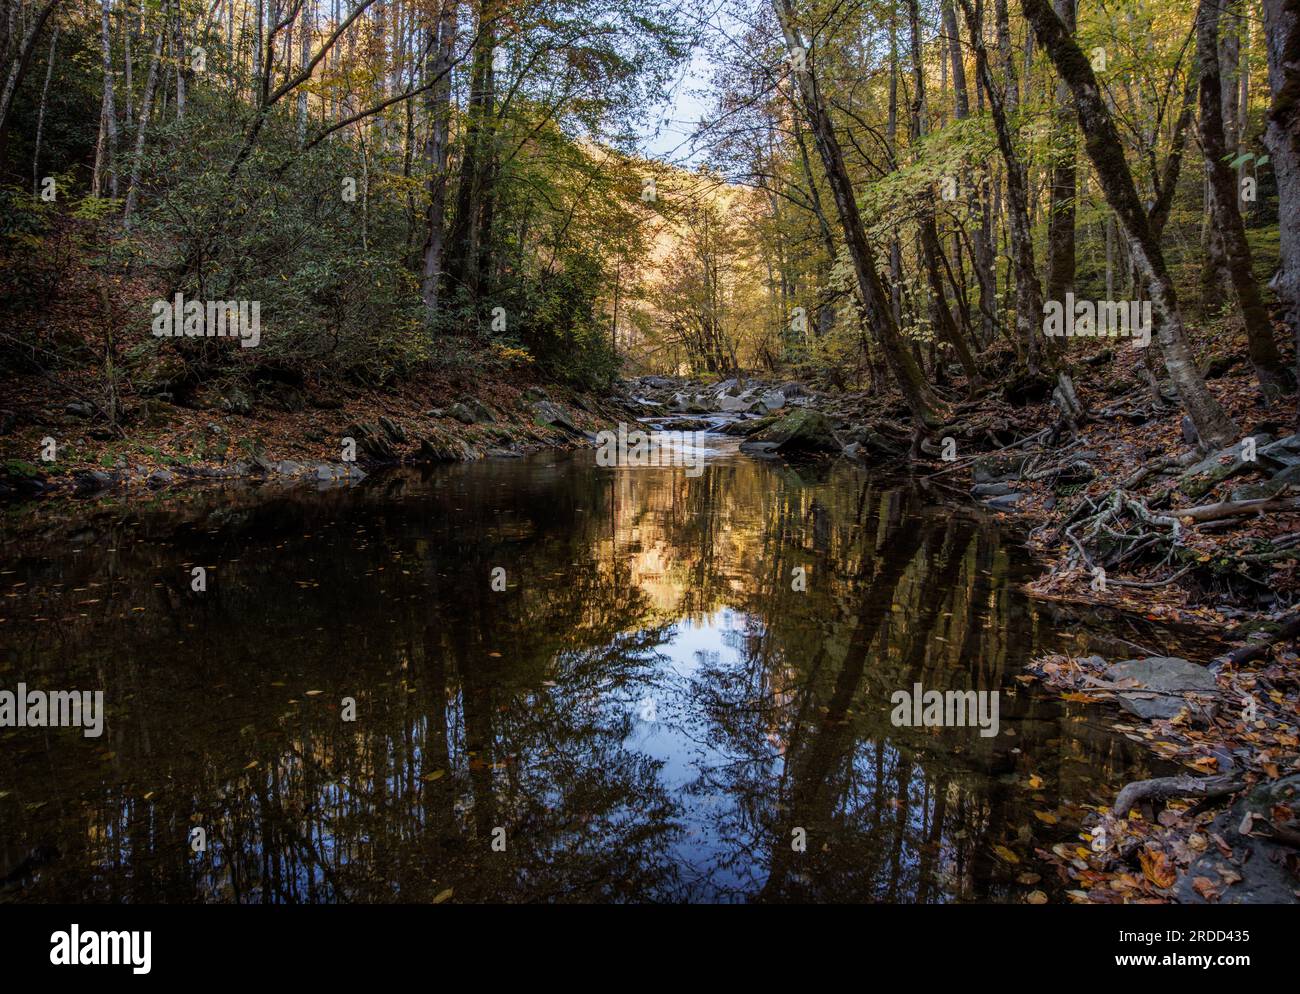 Reflections in the still surface of the Little River on a late autumn afternoon. Stock Photo